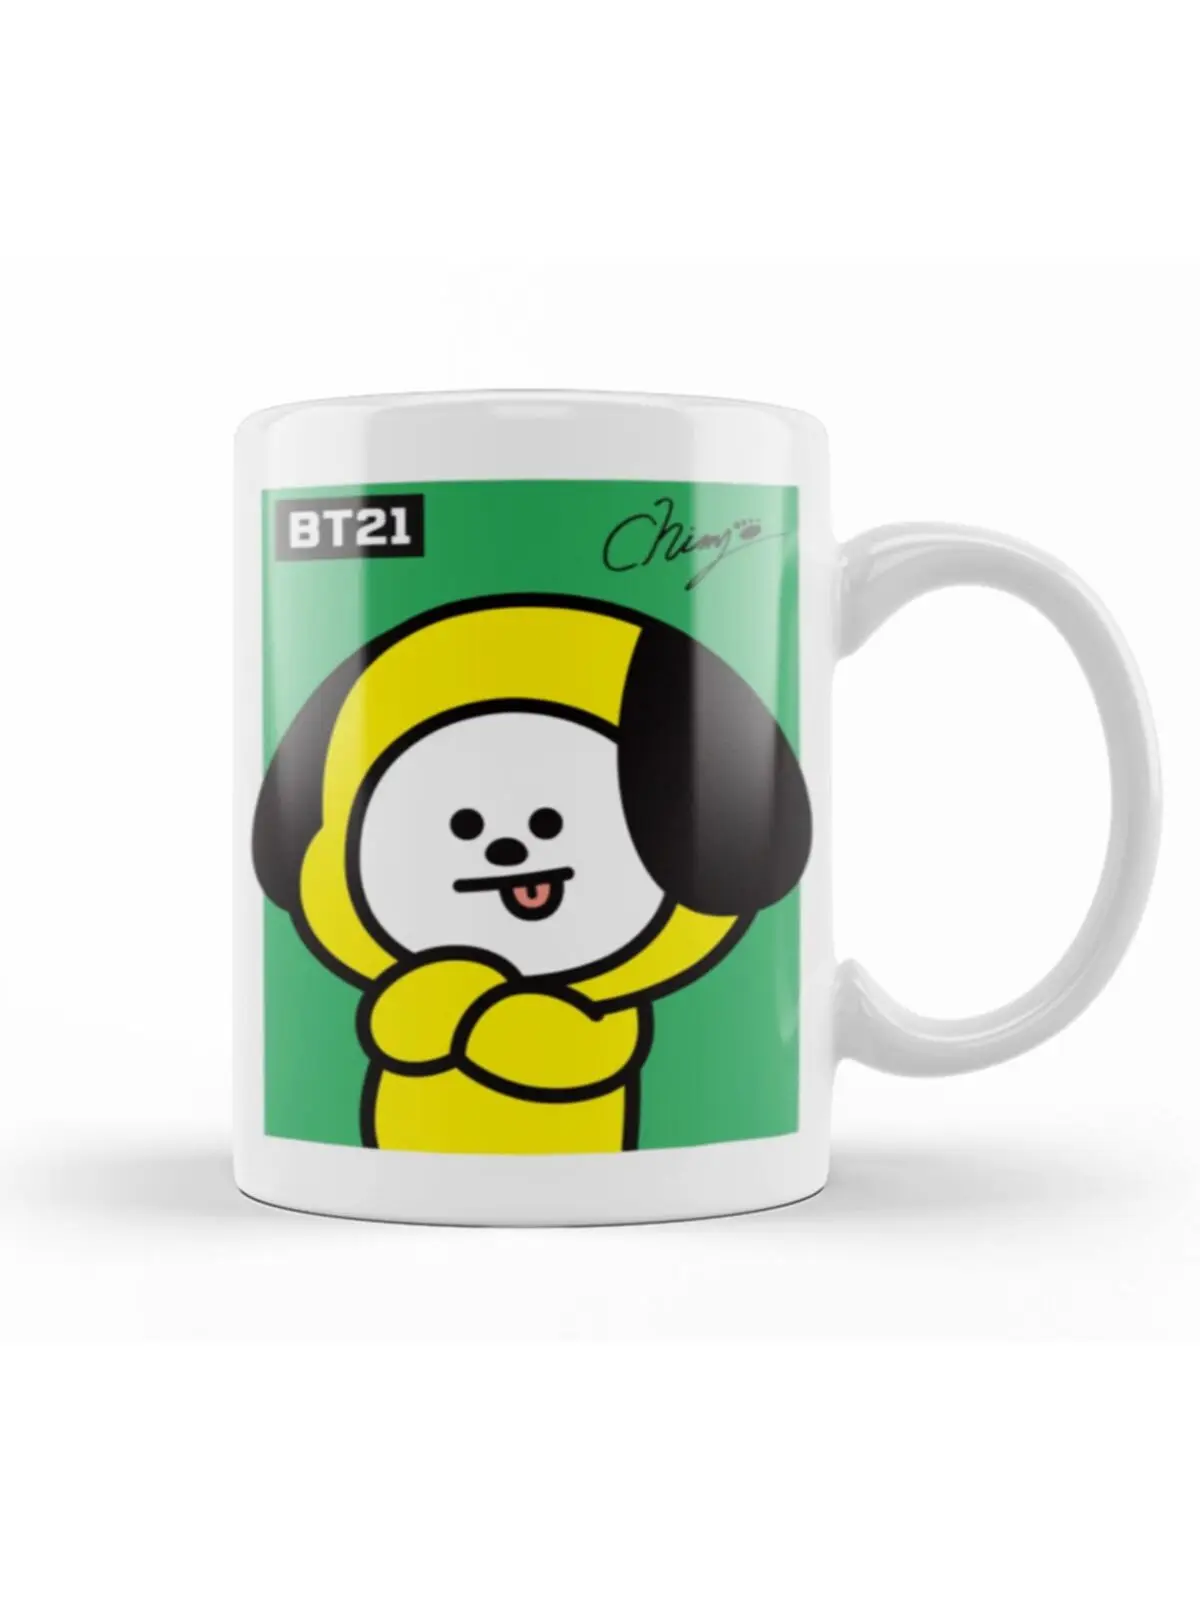 

Chimmy Design Porcelain Cups Tea and Coffee Mugs Colorful Printed Gift Items Office And Home Decoration Hot Expresso Chocolate